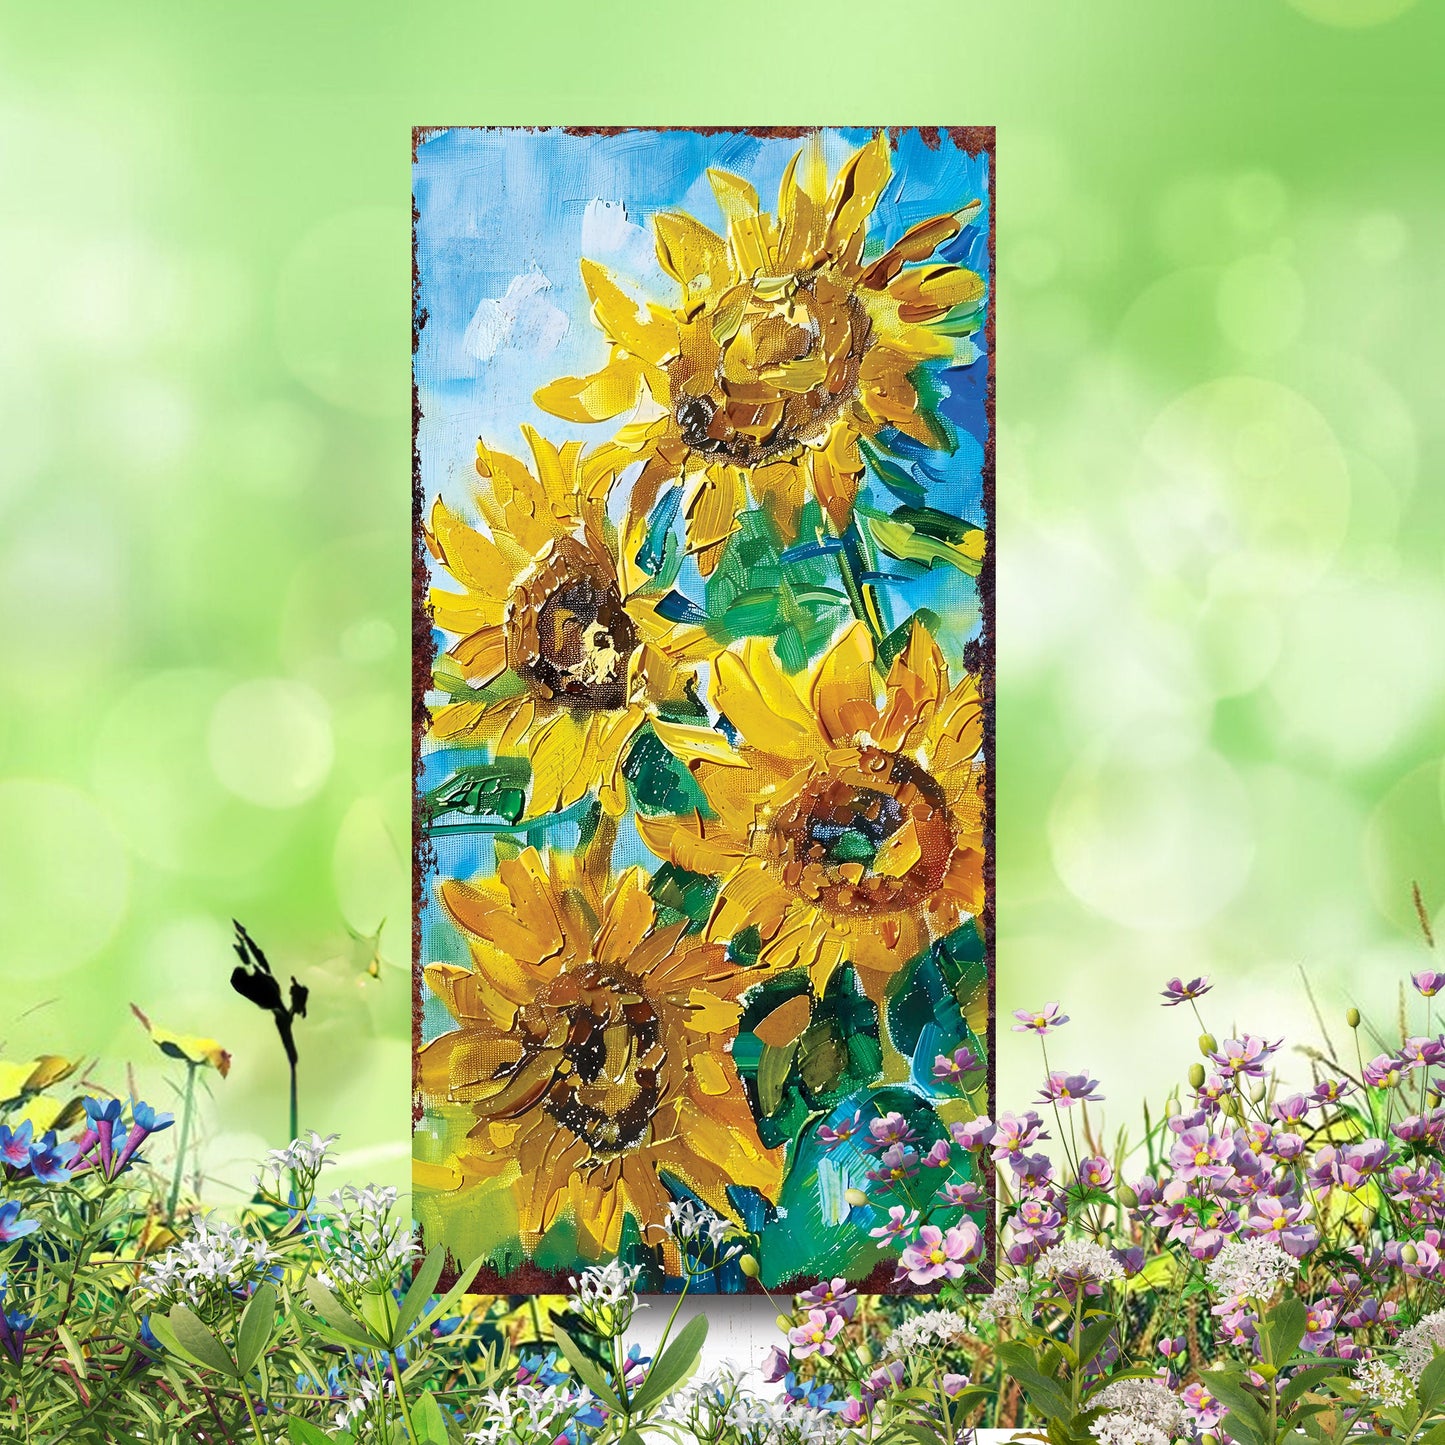 30in Summer Garden Stake - Oil Paint Style Sunflower Decor | Great for Outdoor Decor, Yard Art, and Garden Decorations